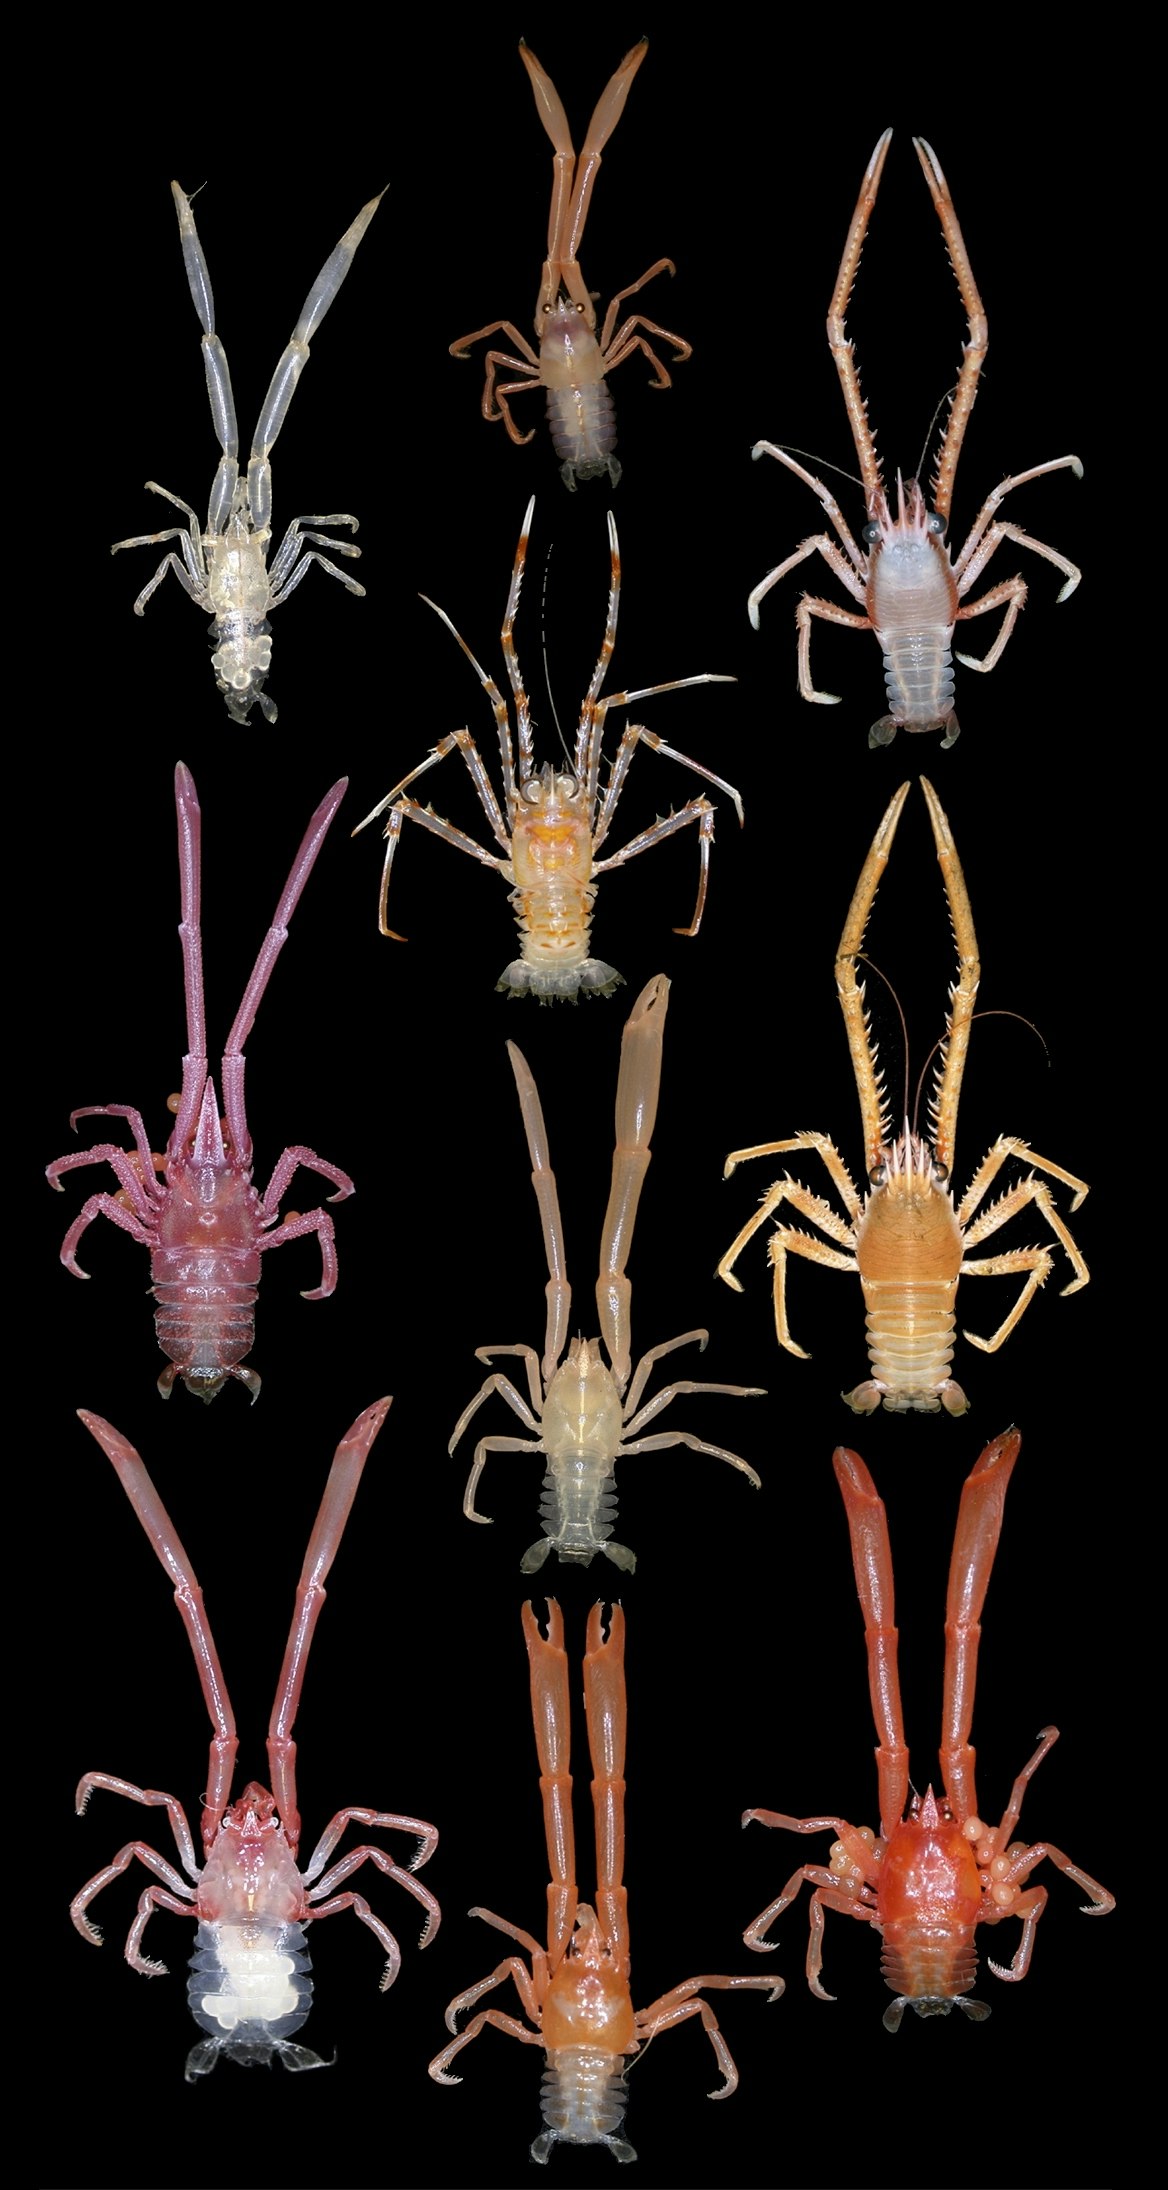 10 different squat lobsters, all different colours, arranged on a black background.